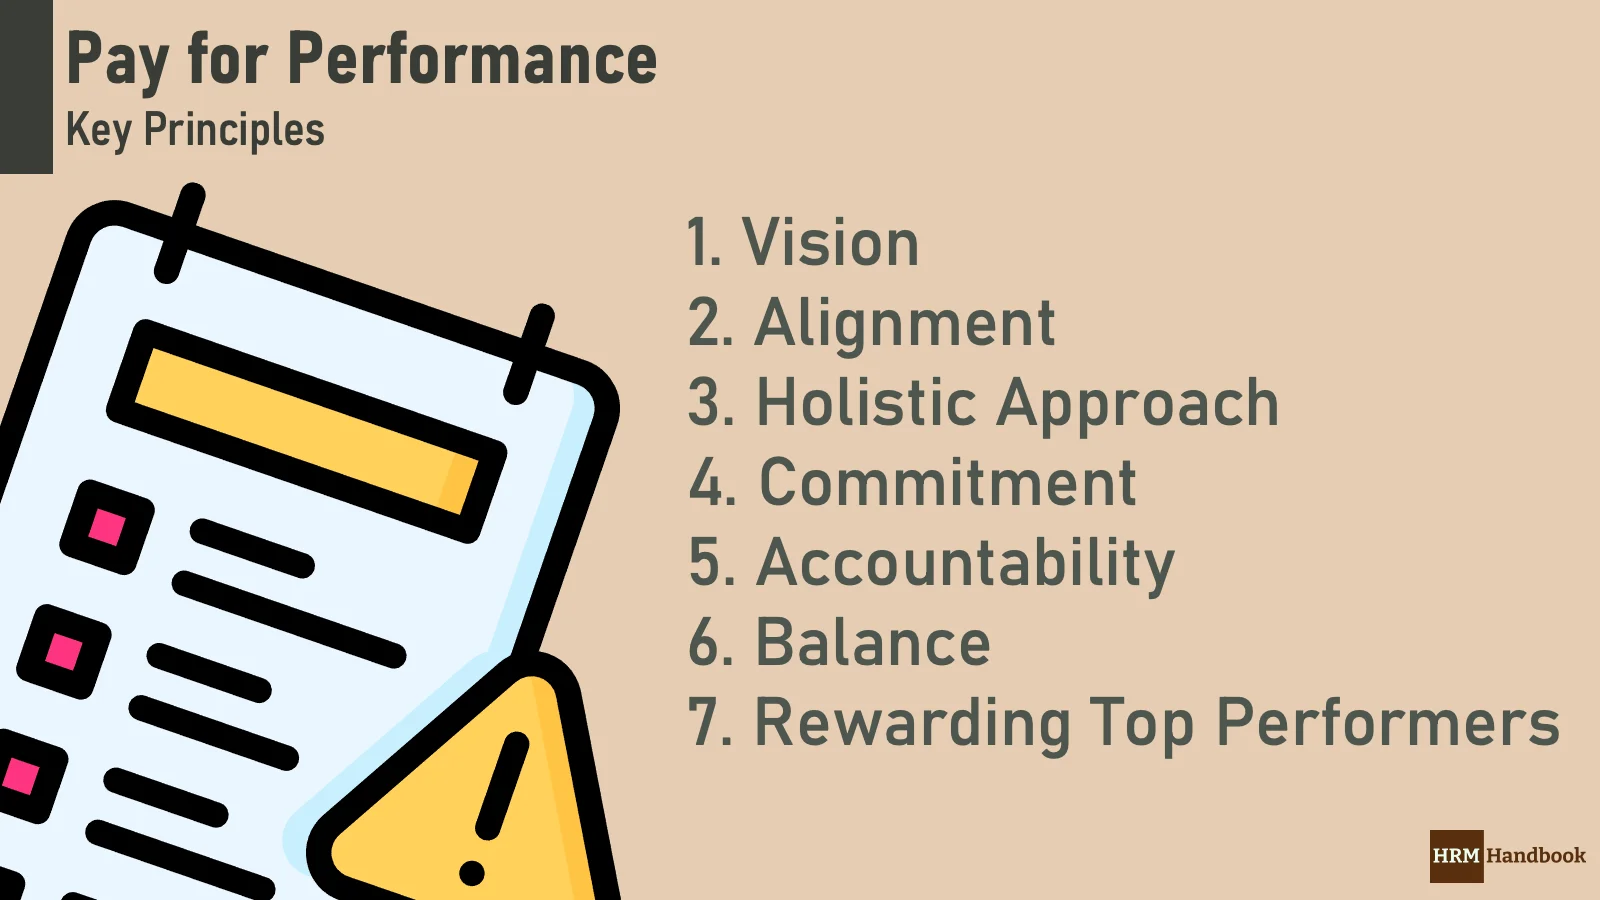 Key Principles of Pay for Performance